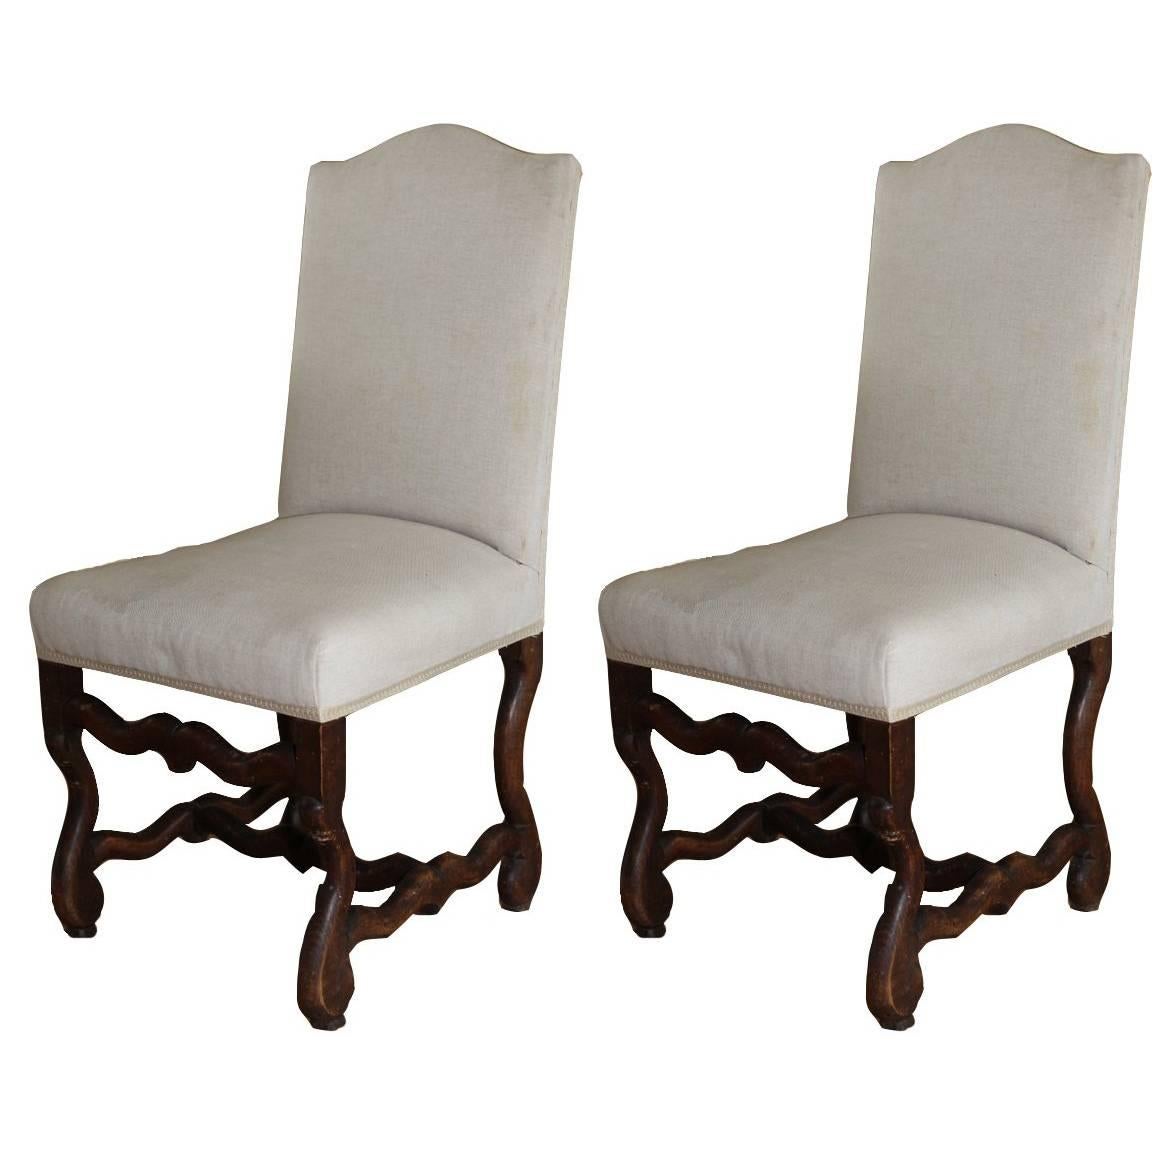 Set of Two Upholstered Louis XIII Chairs, c. 1860 For Sale